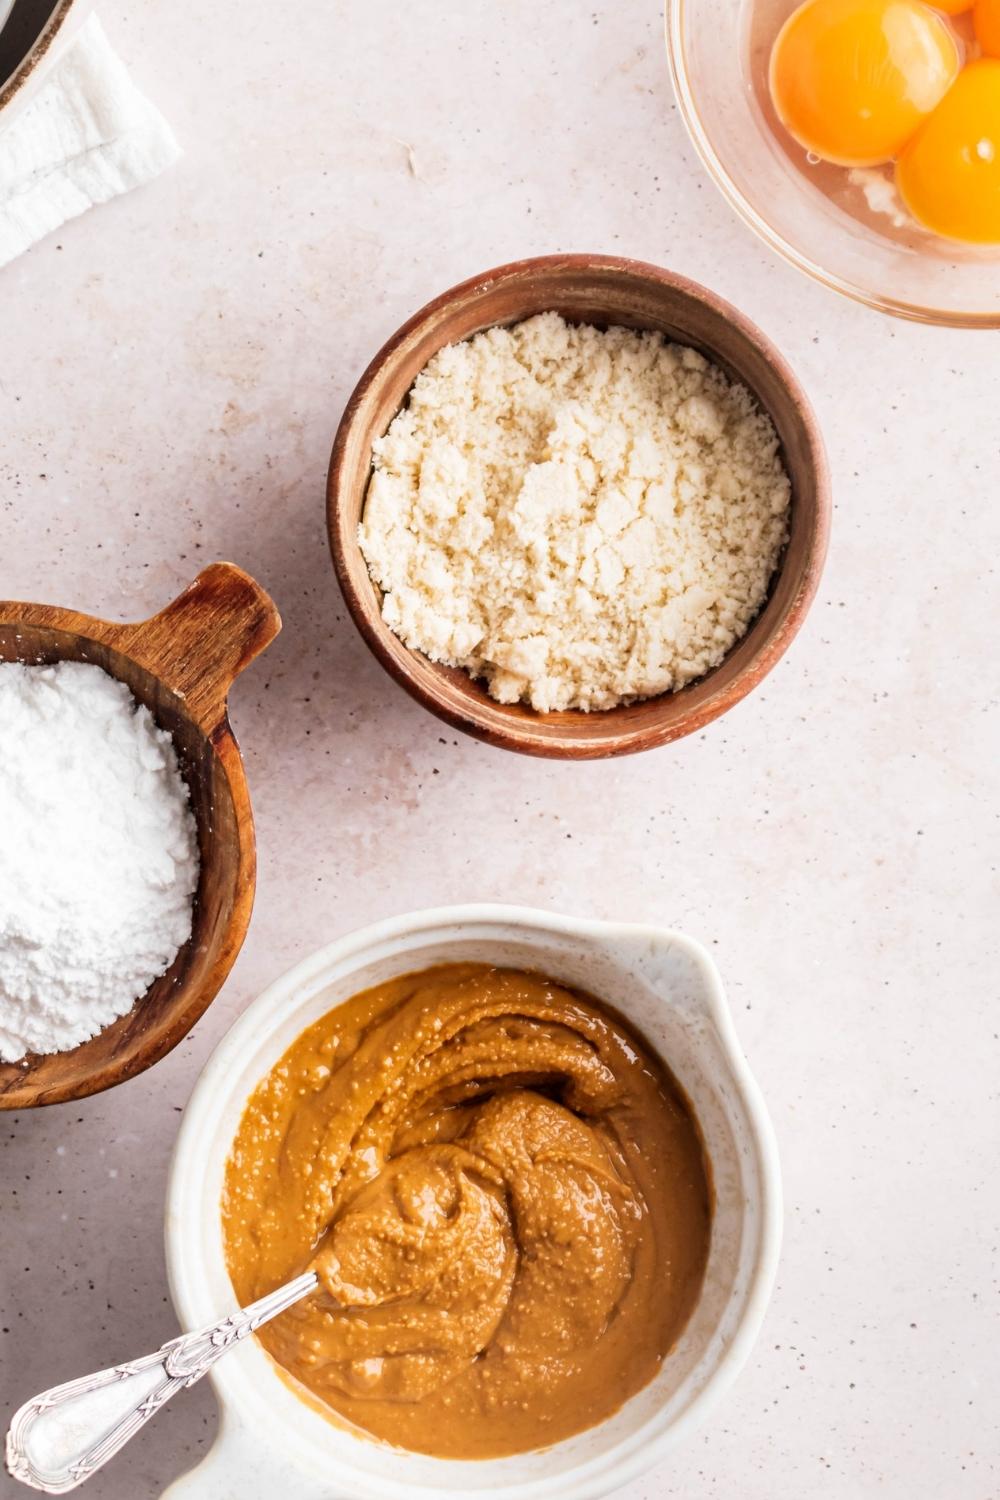 A bowl of peanut butter, a bowl of confectioner erythritol, a bowl of almond flour, and part of a bowl of four eggs all on a white counter.